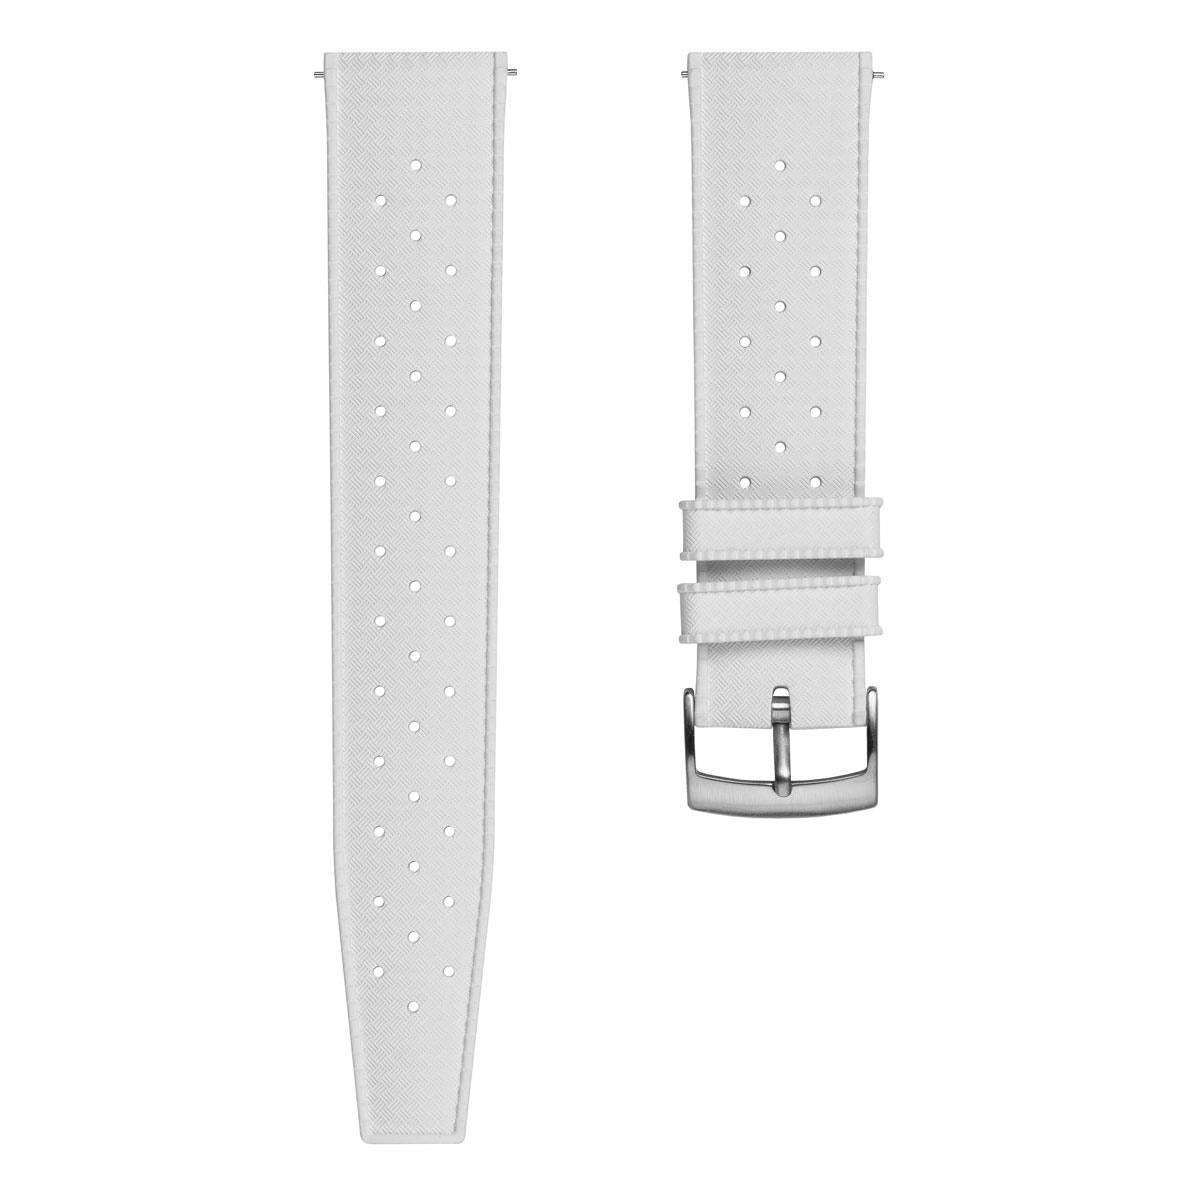 Classic Tropical Style FKM Rubber Watch Strap - White